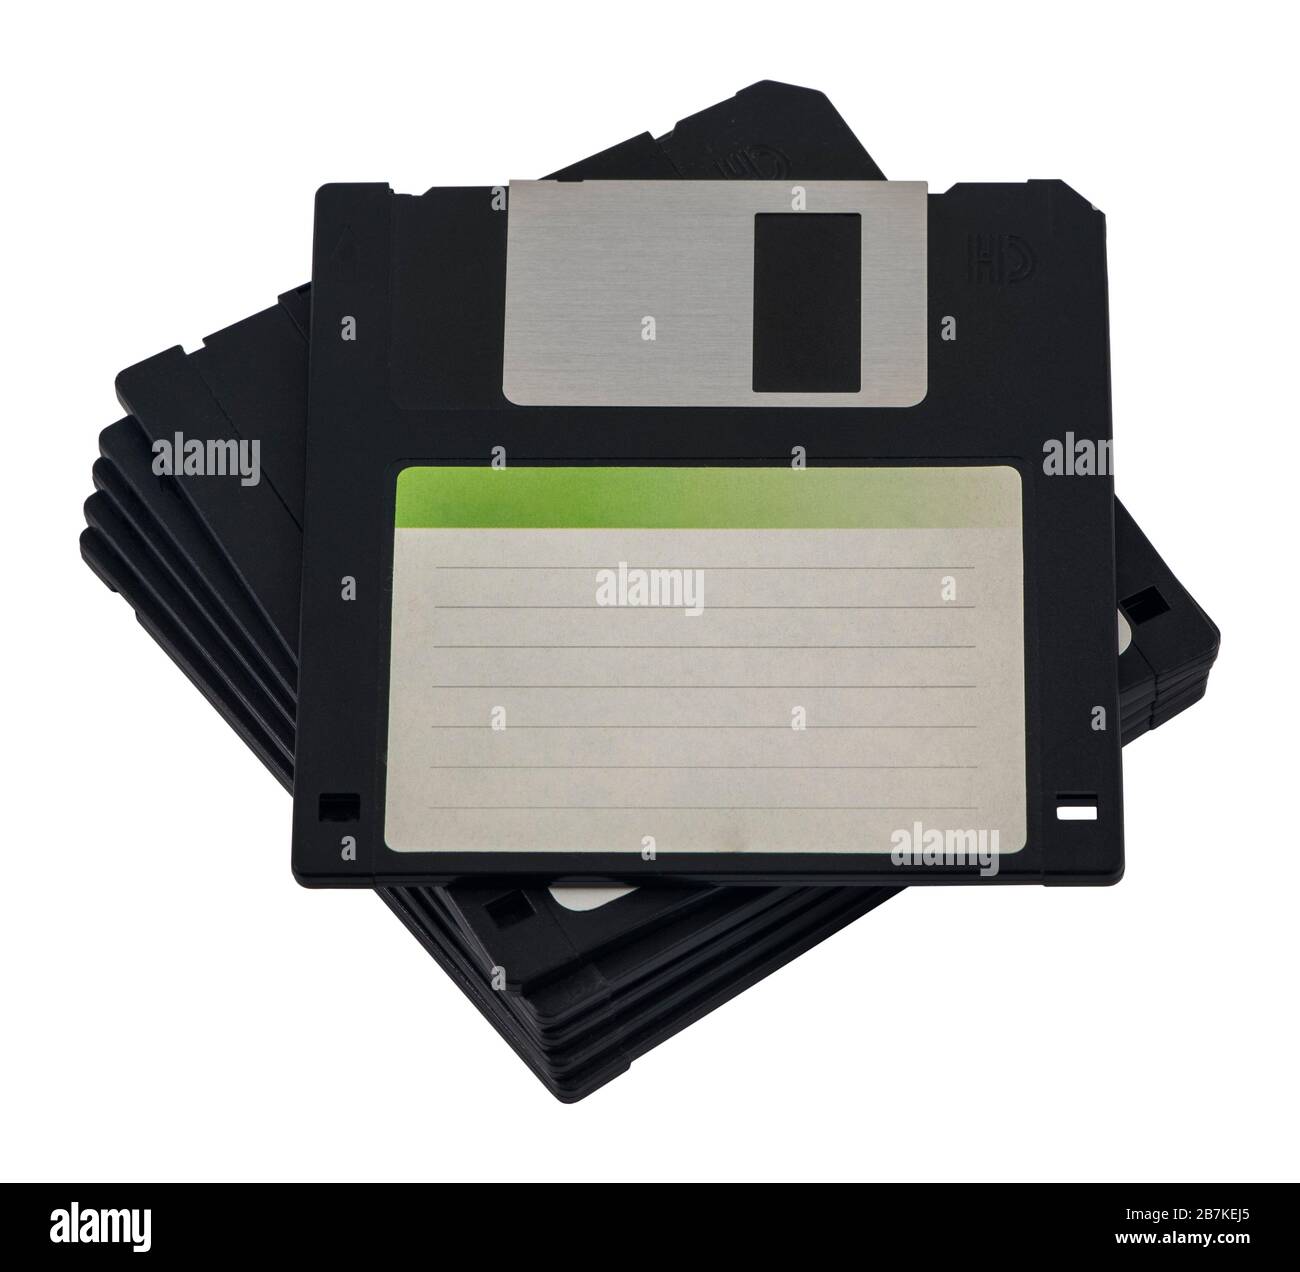 Stacked floppy disks / diskettes isolated on white background. Floppy disc with blank sticker on top. Stock Photo